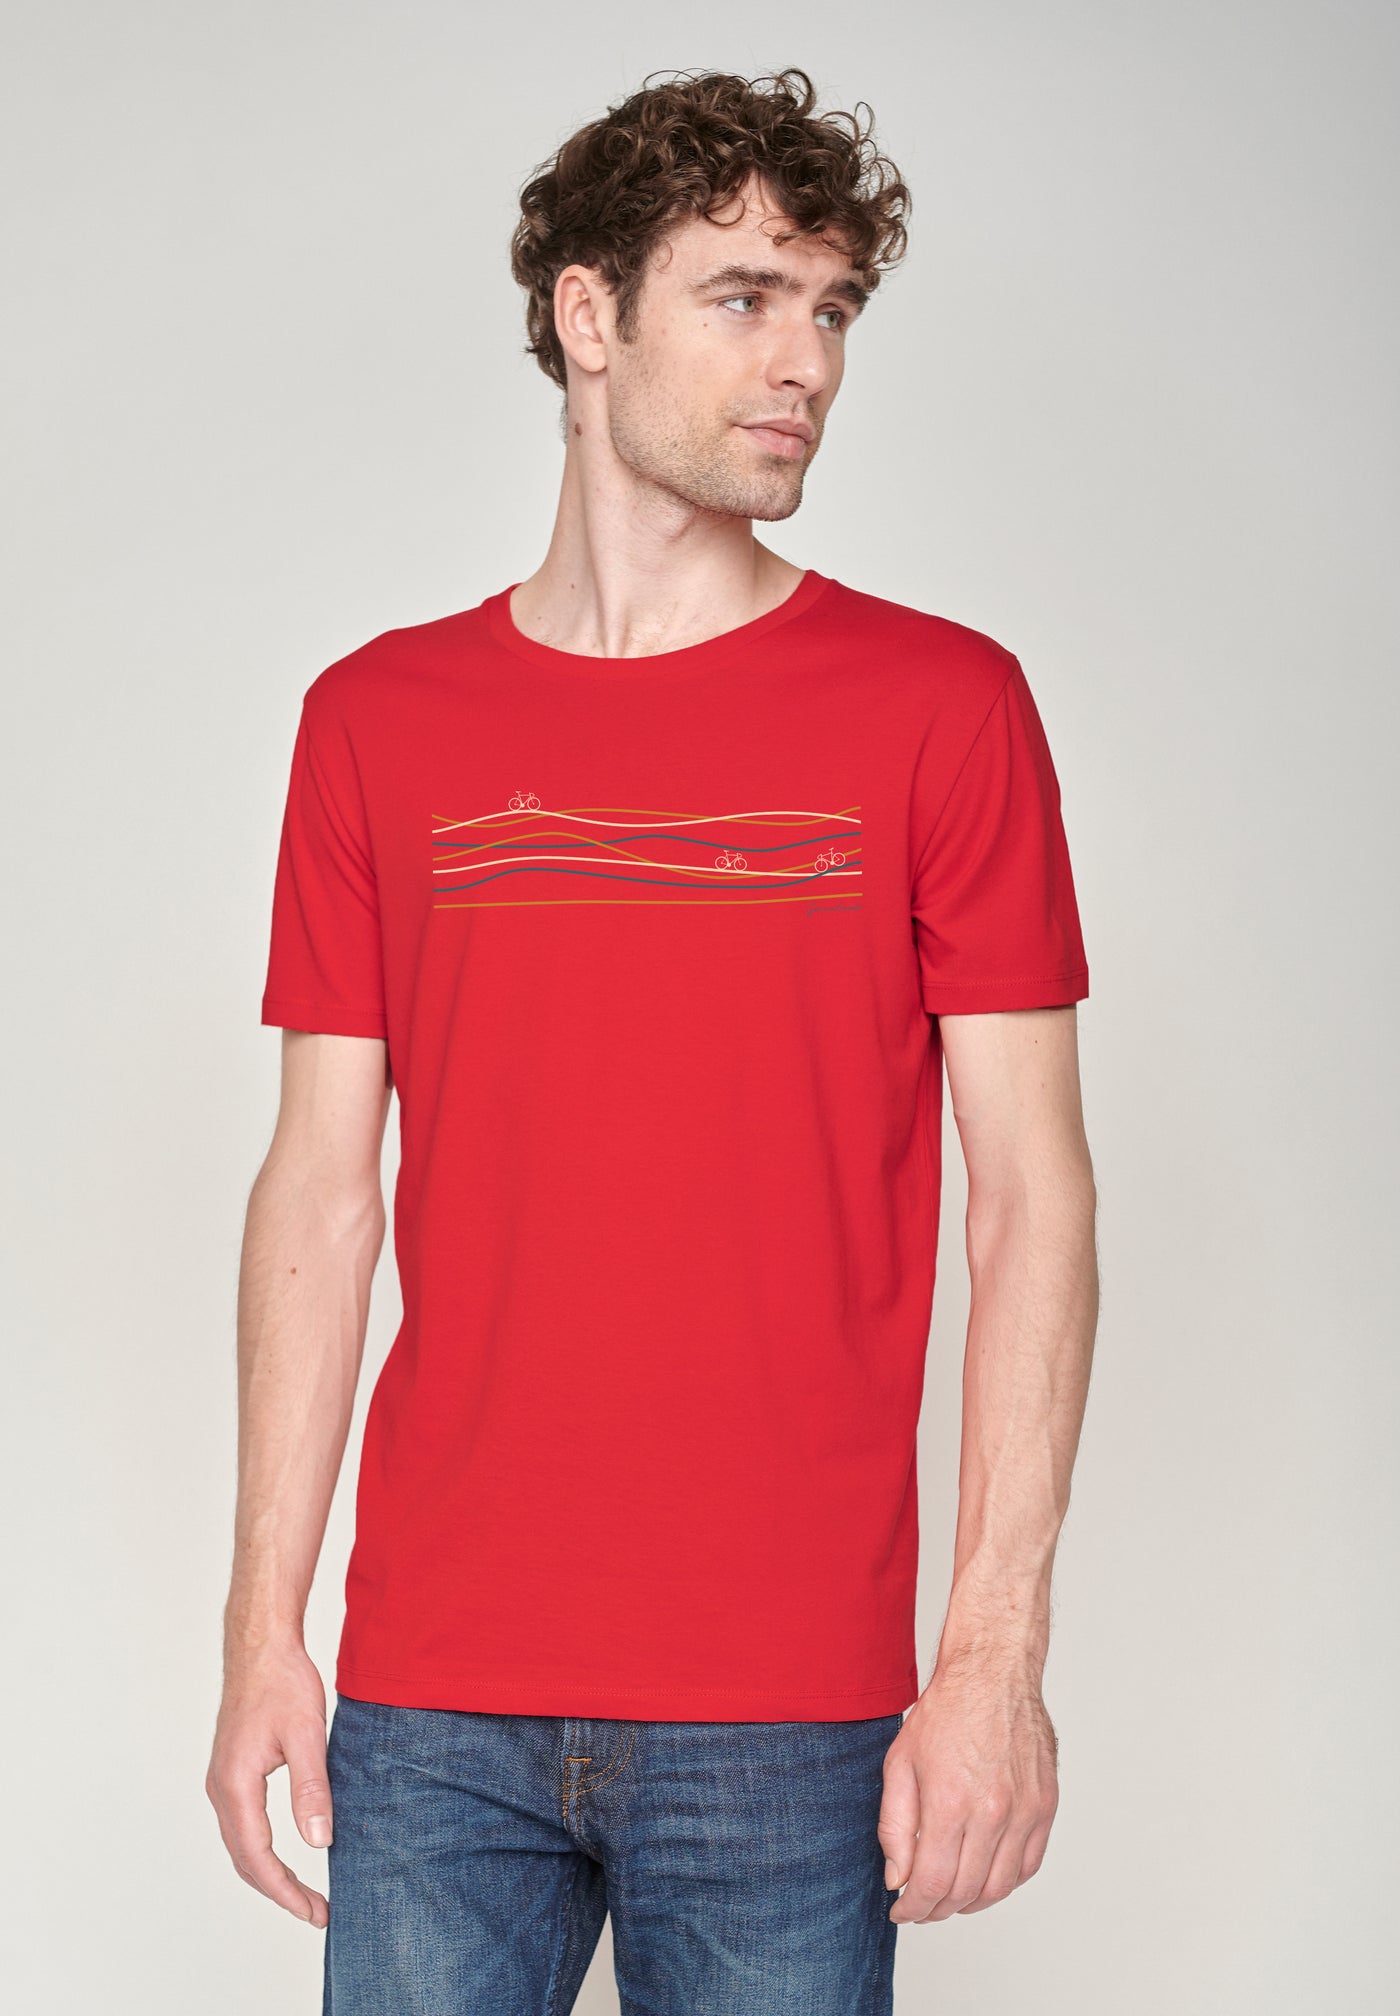 Tolles T-Shirt Bike Lanes Guide Flame Red in rot aus Bio-Baumwolle.